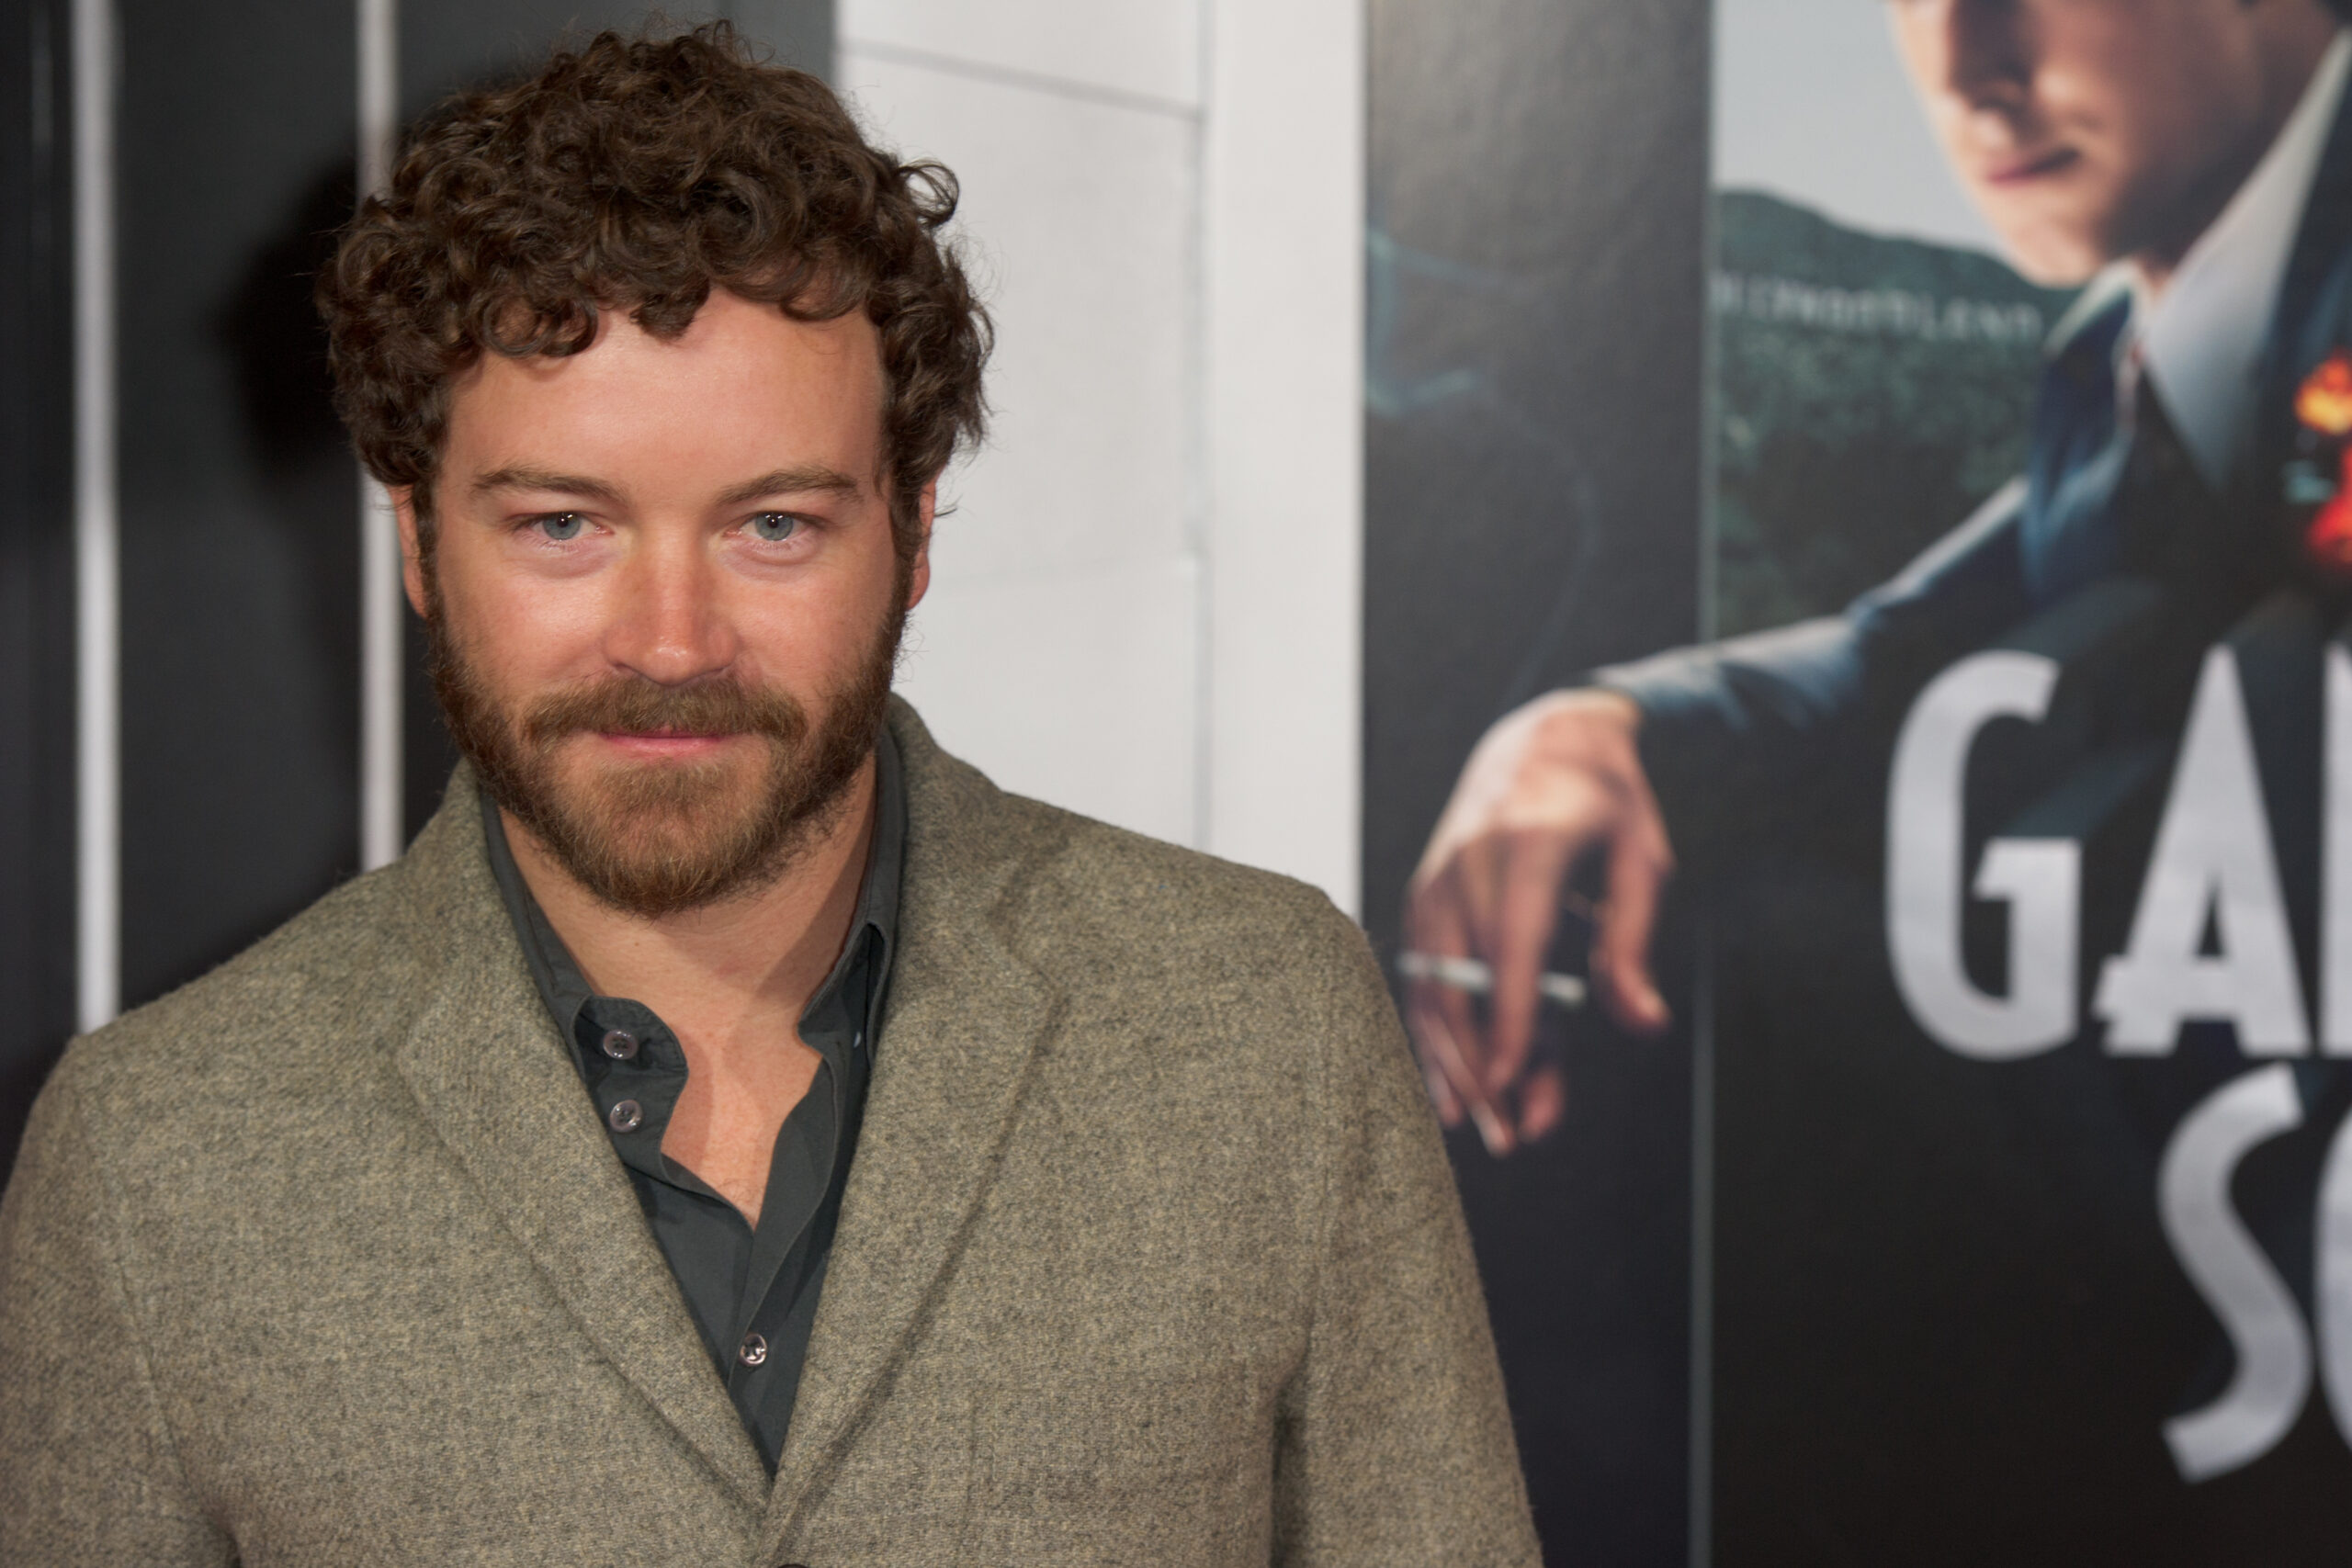 ’70s Show’ actor Danny Masterson on trial on 3 rape charges